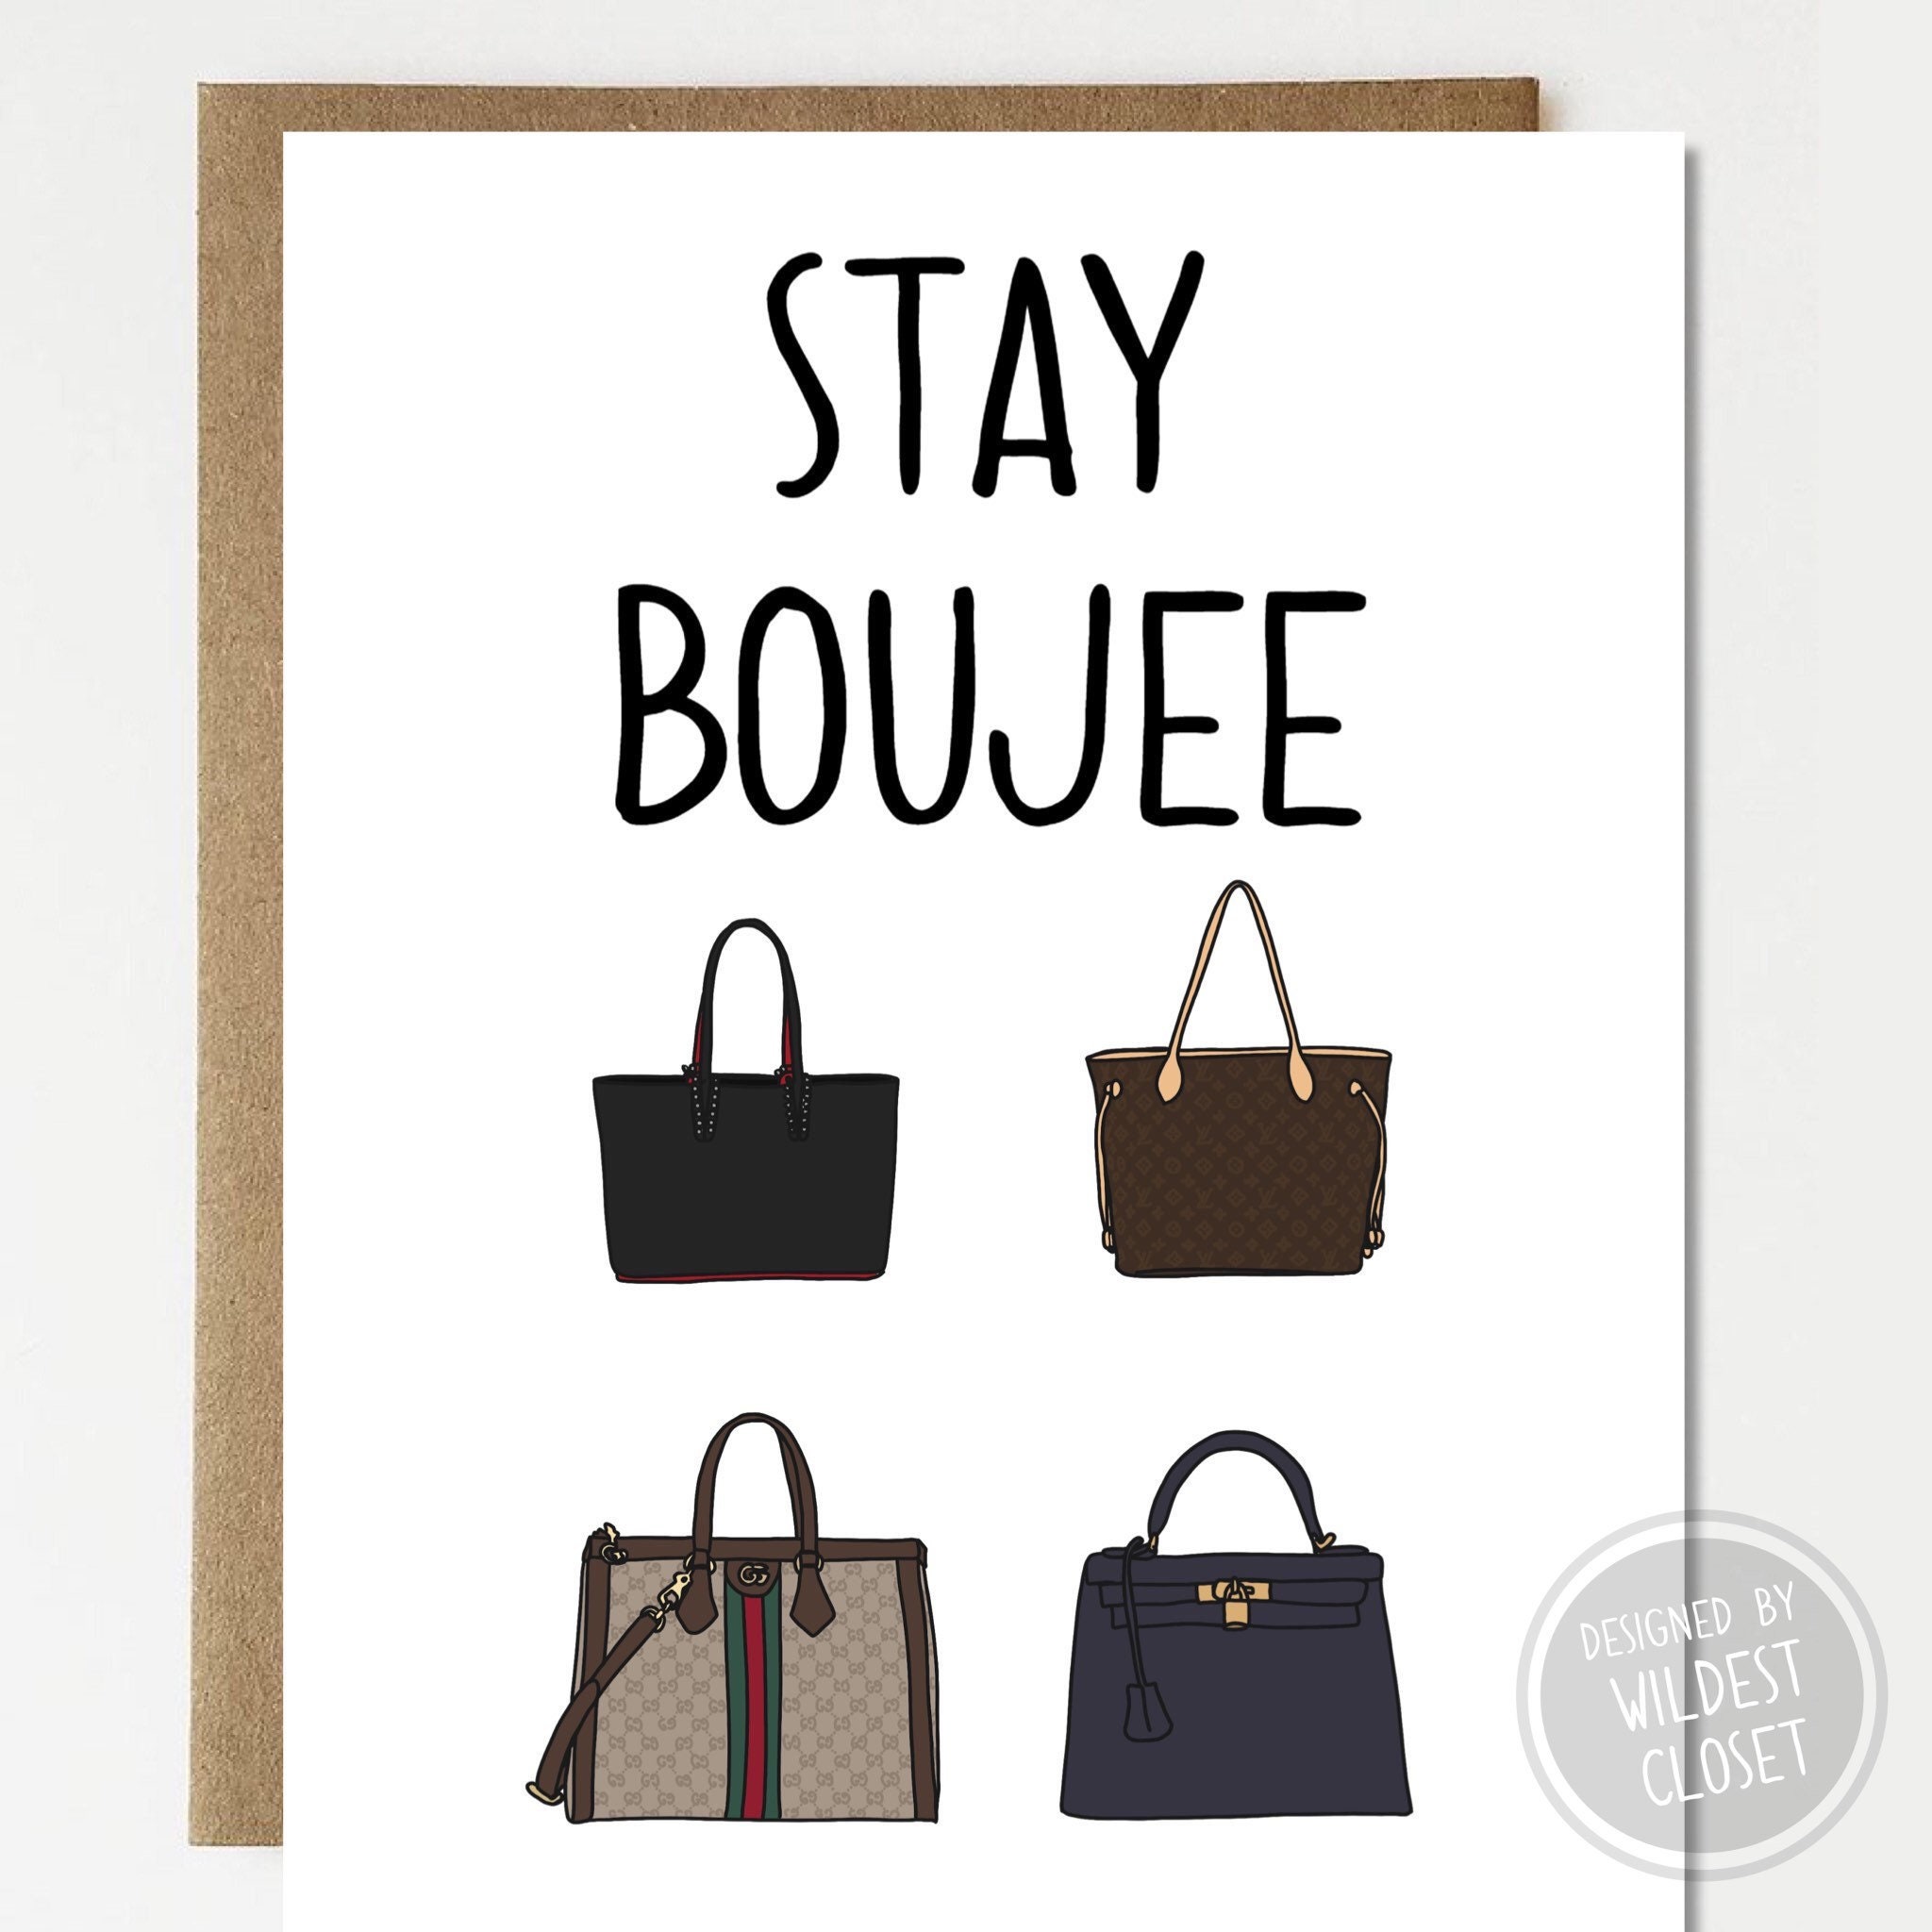 Luxury Purse Passion: A Chic Greeting Card on  for Boujee